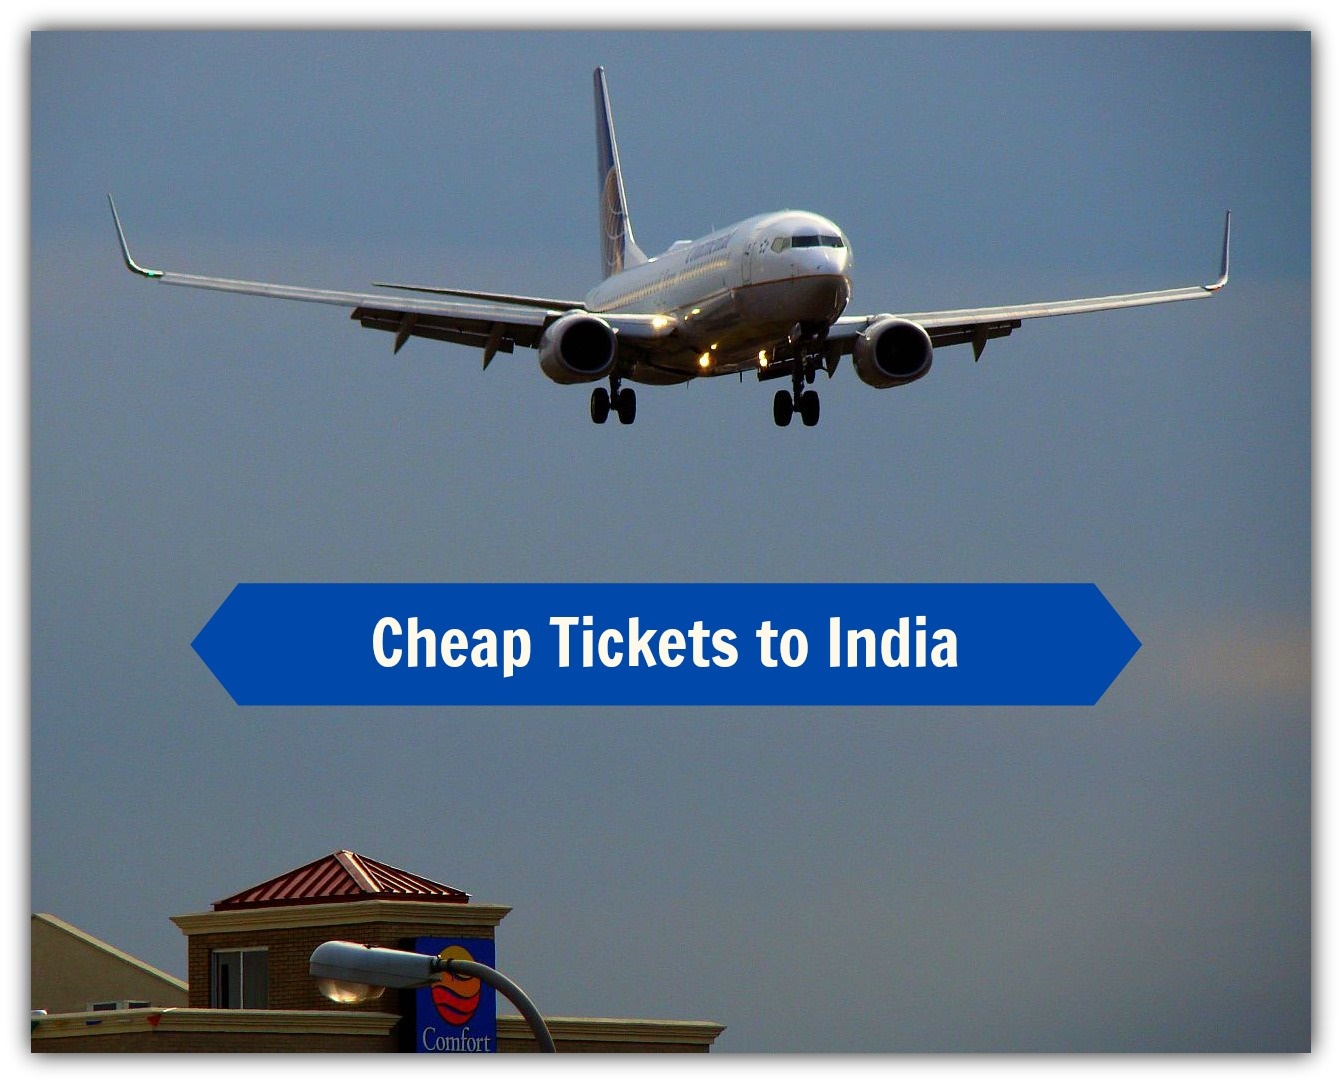 Cheap tickets to India from USA